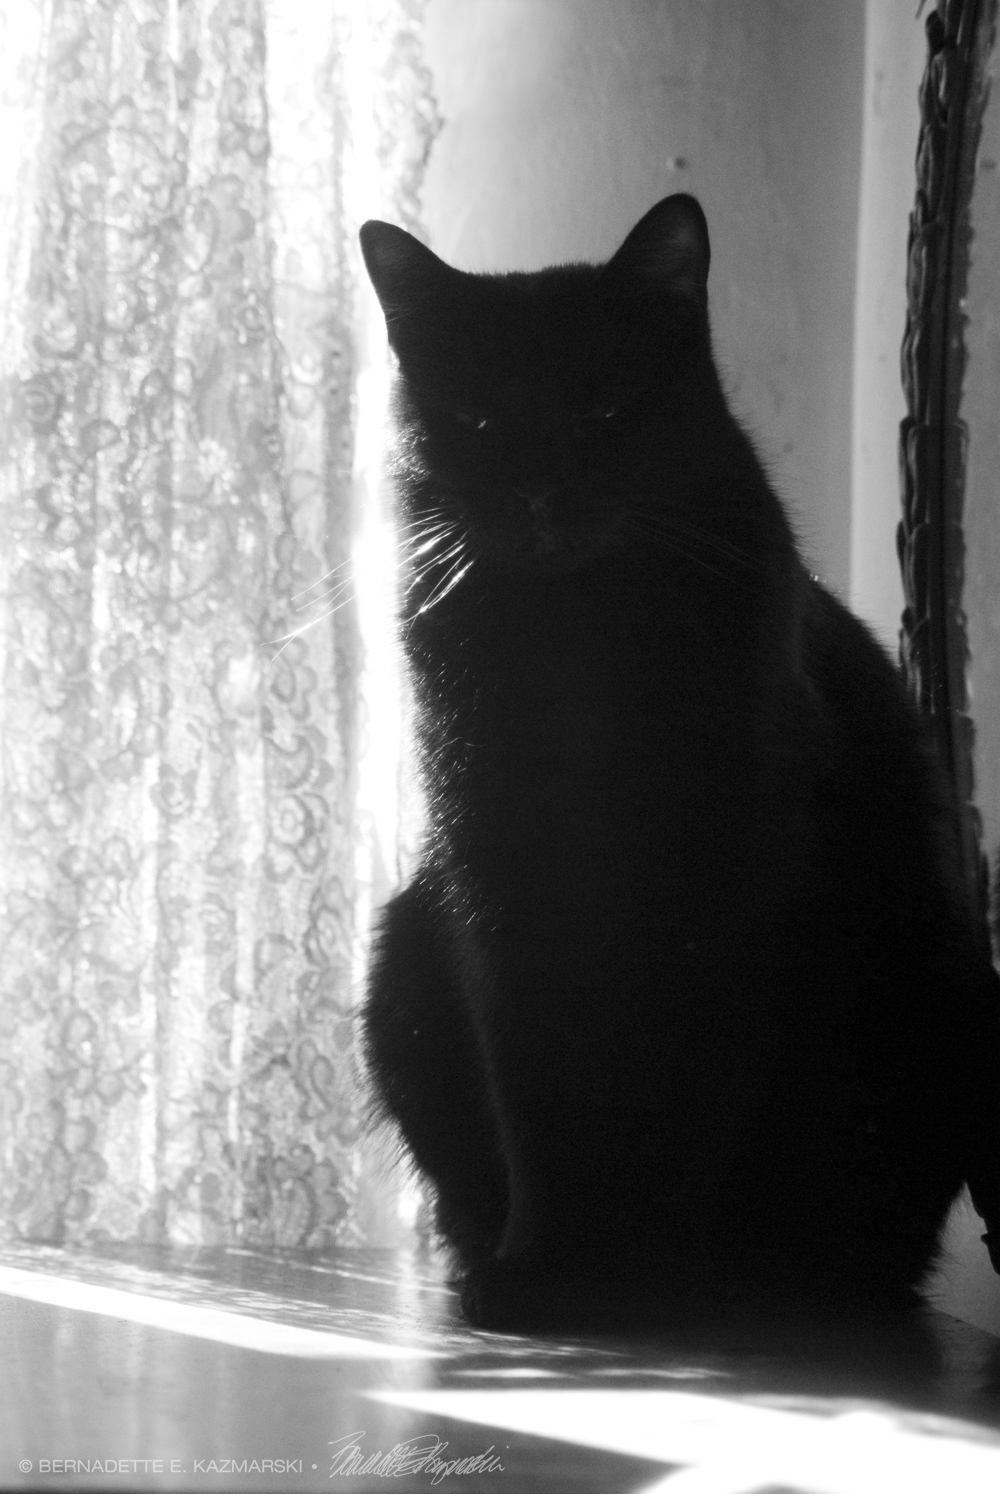 black cat in silhouette against lace curtain